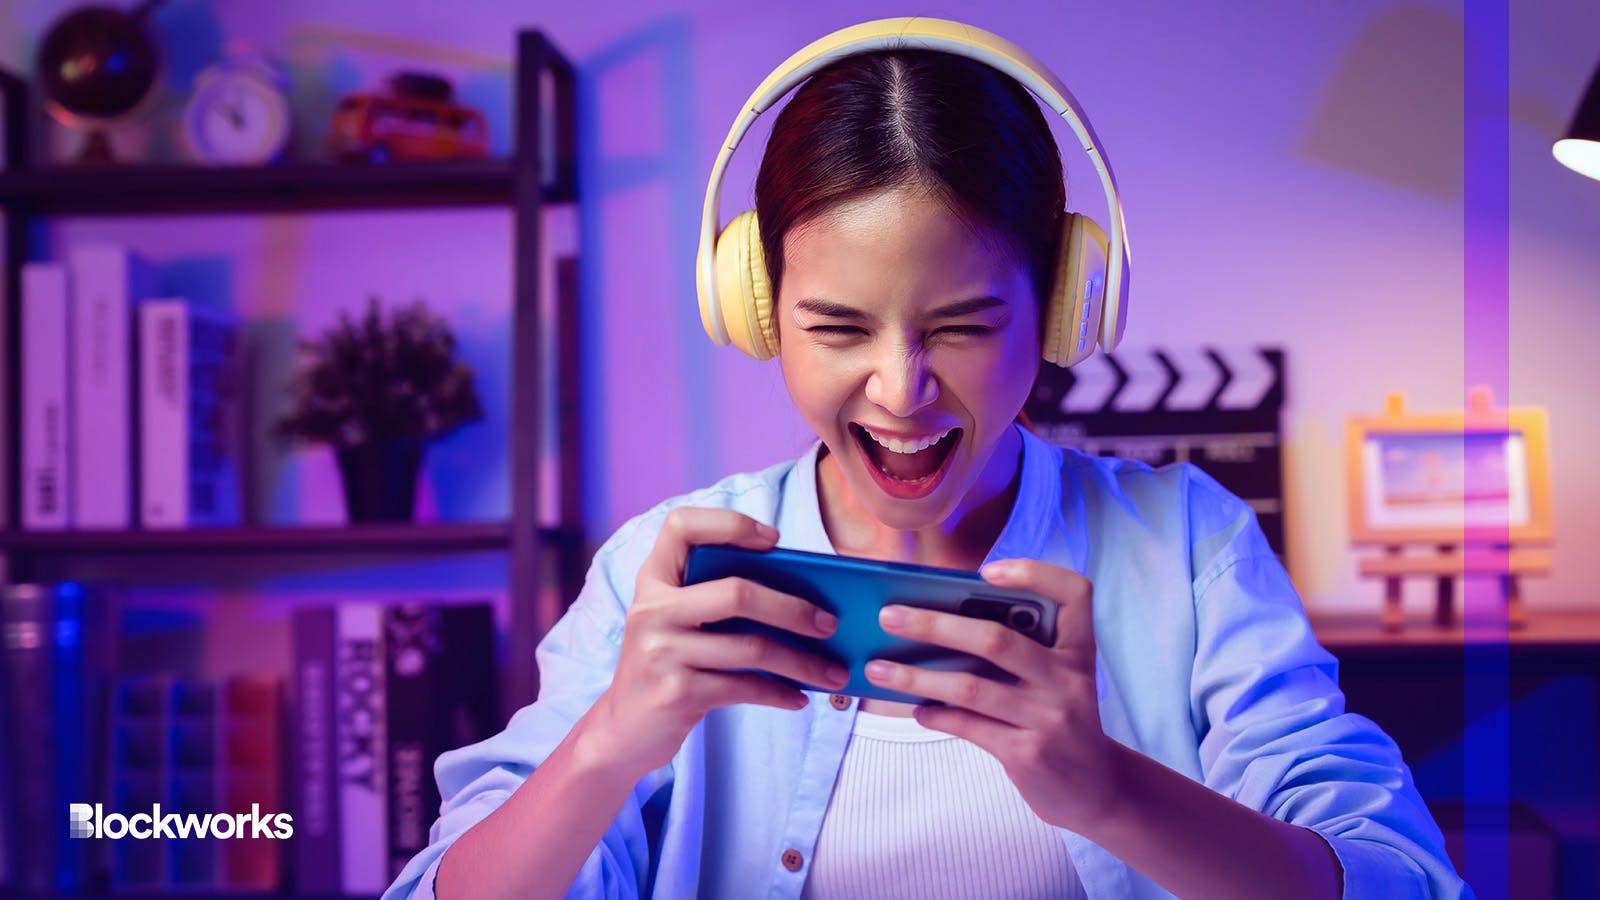 How to listen to music while gaming